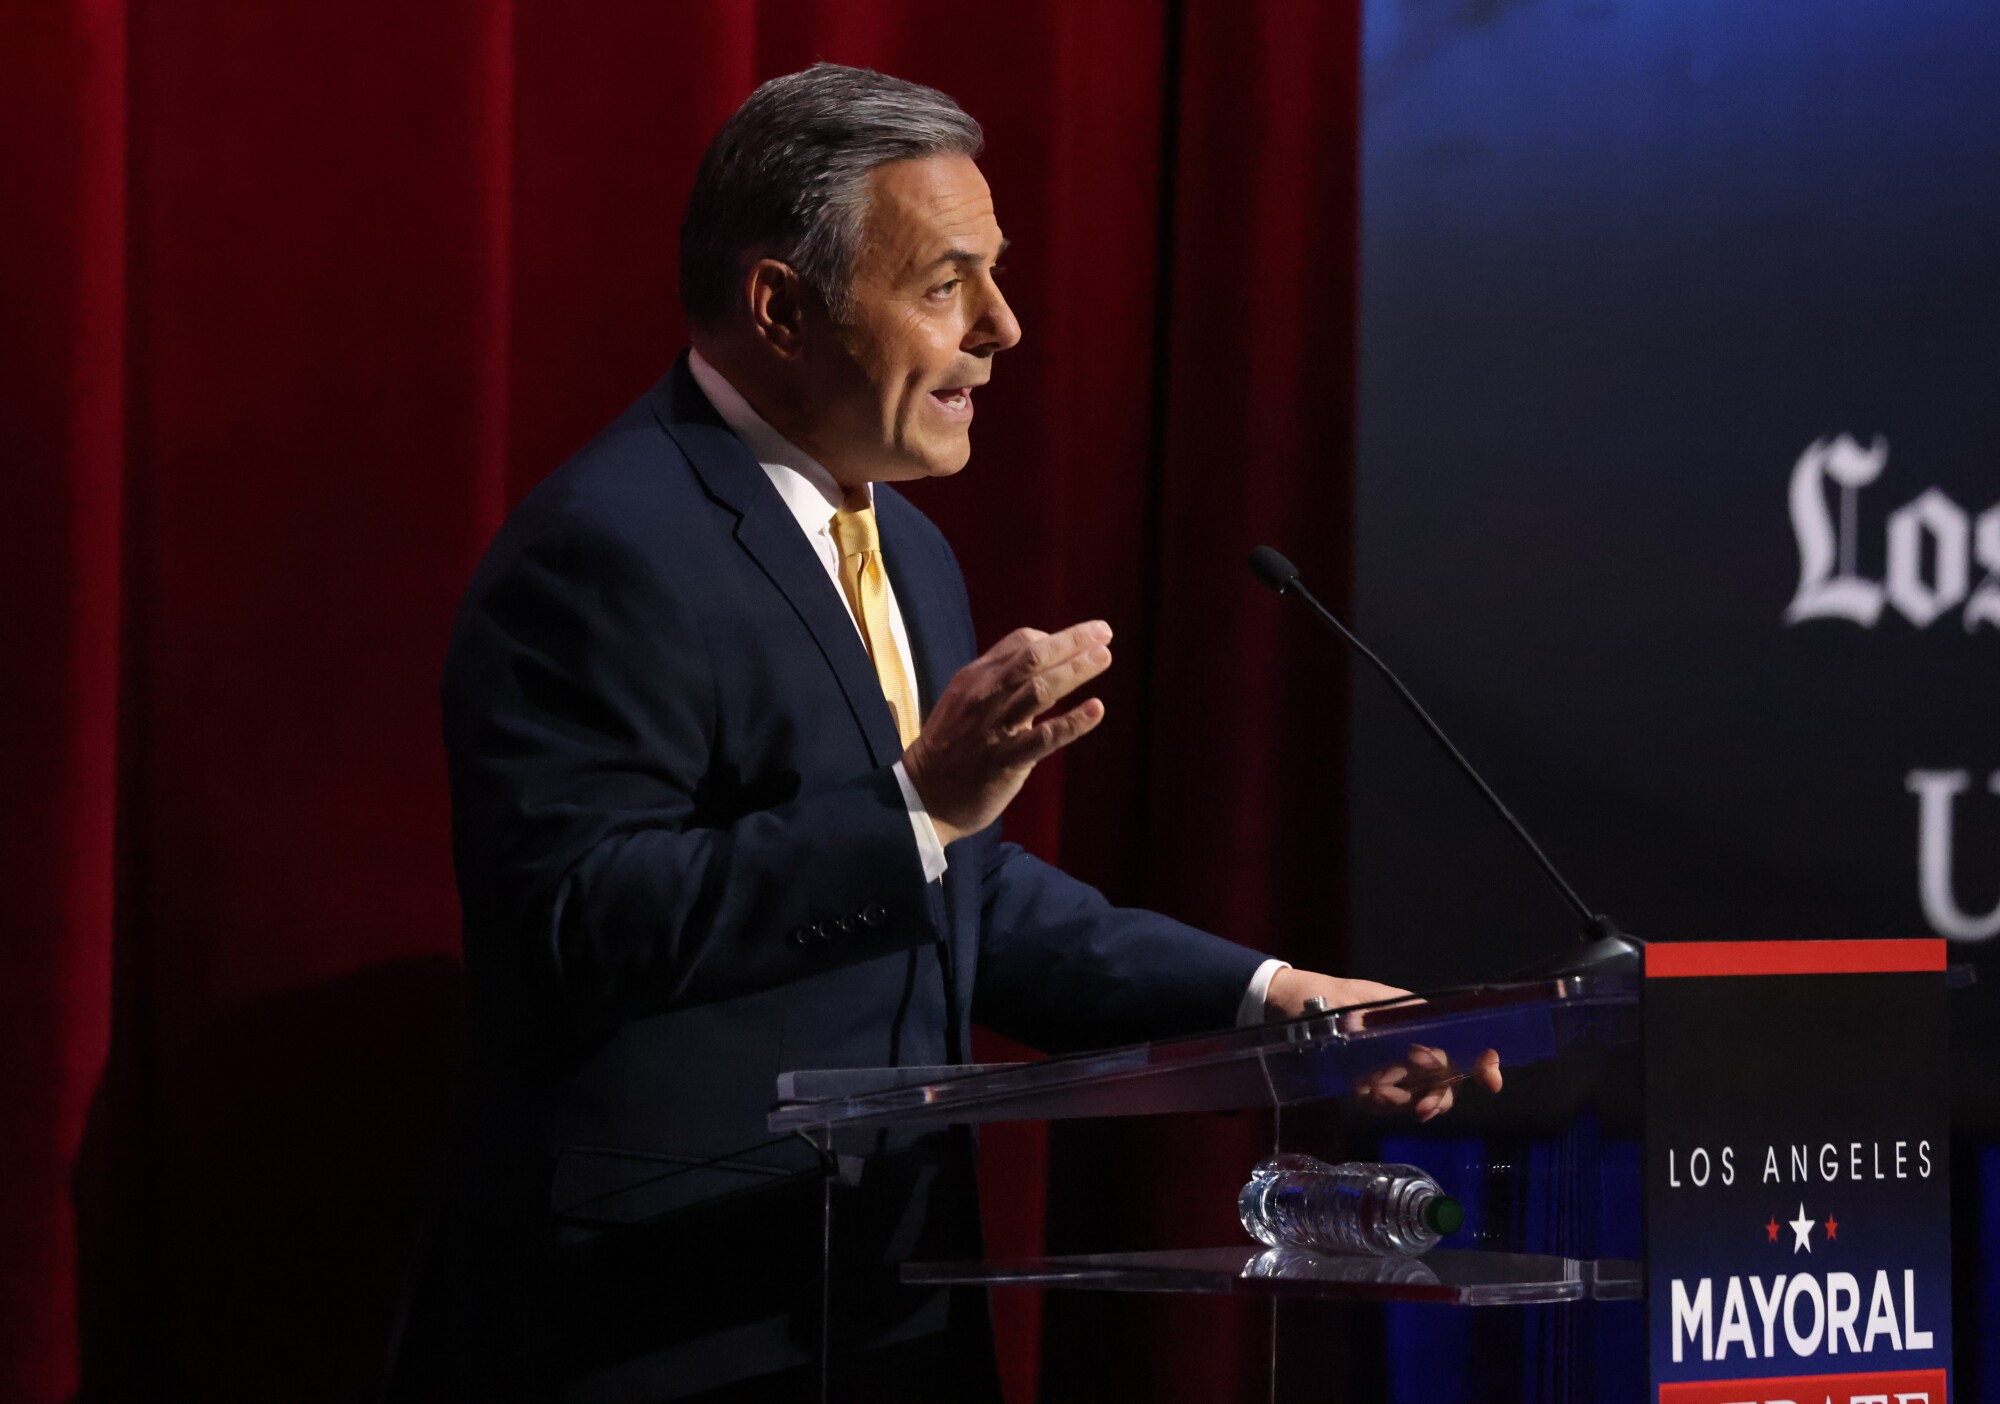 Joe Buscaino, city councilman, talks about the homelessness issue during the candidates' debate at USC's Bovard Auditorium 